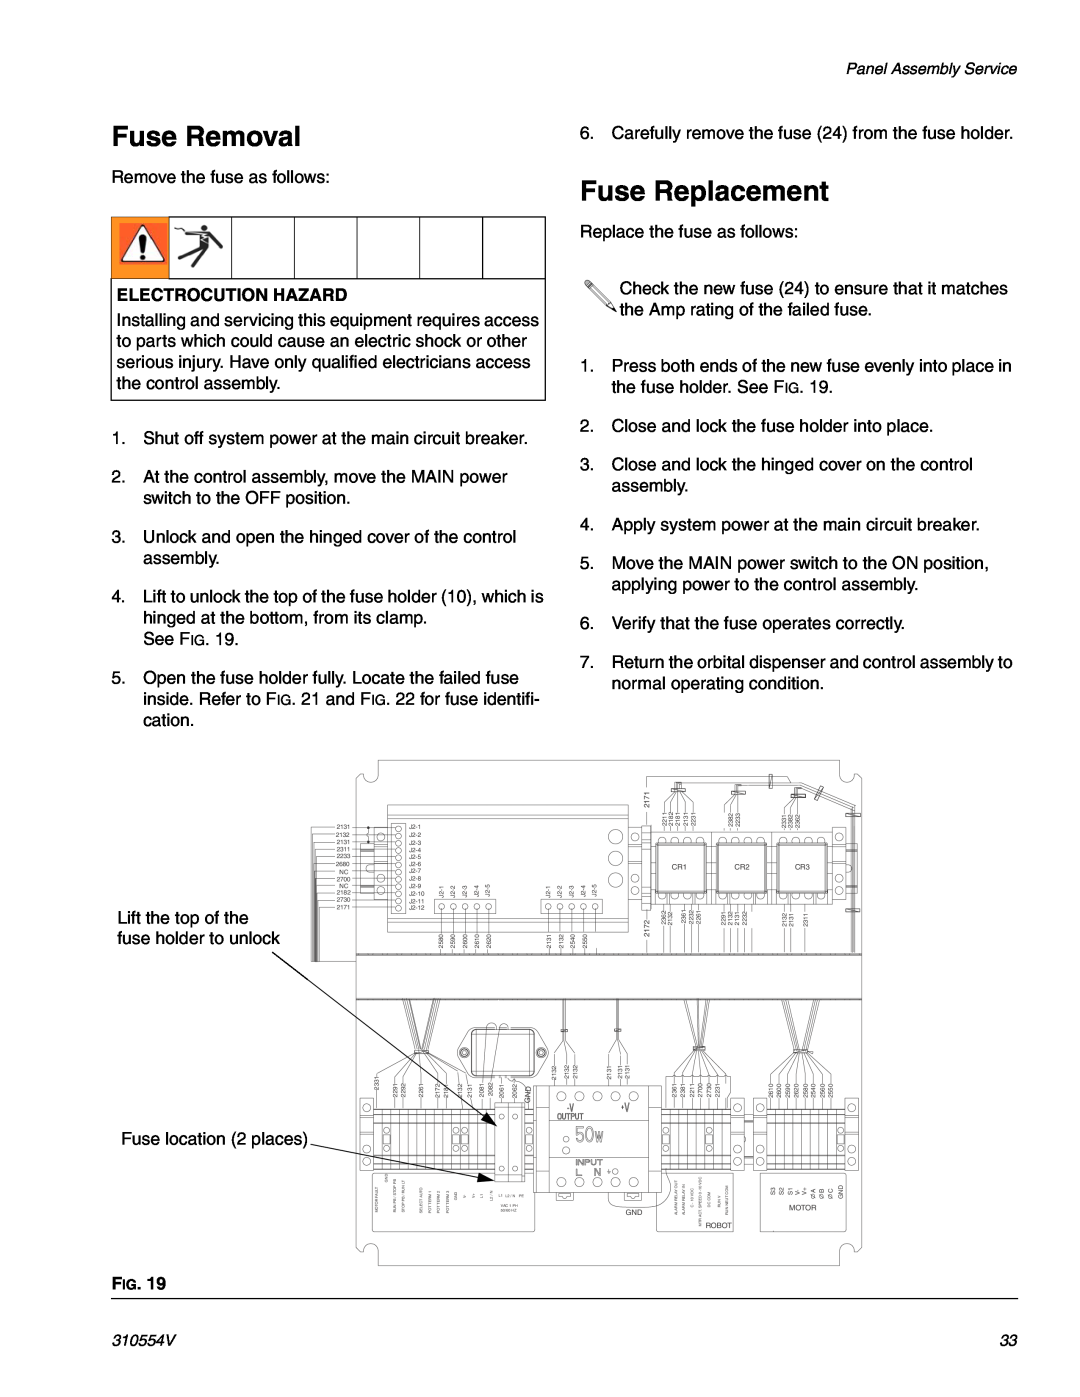 Graco 310554V important safety instructions Fuse Removal, Fuse Replacement 